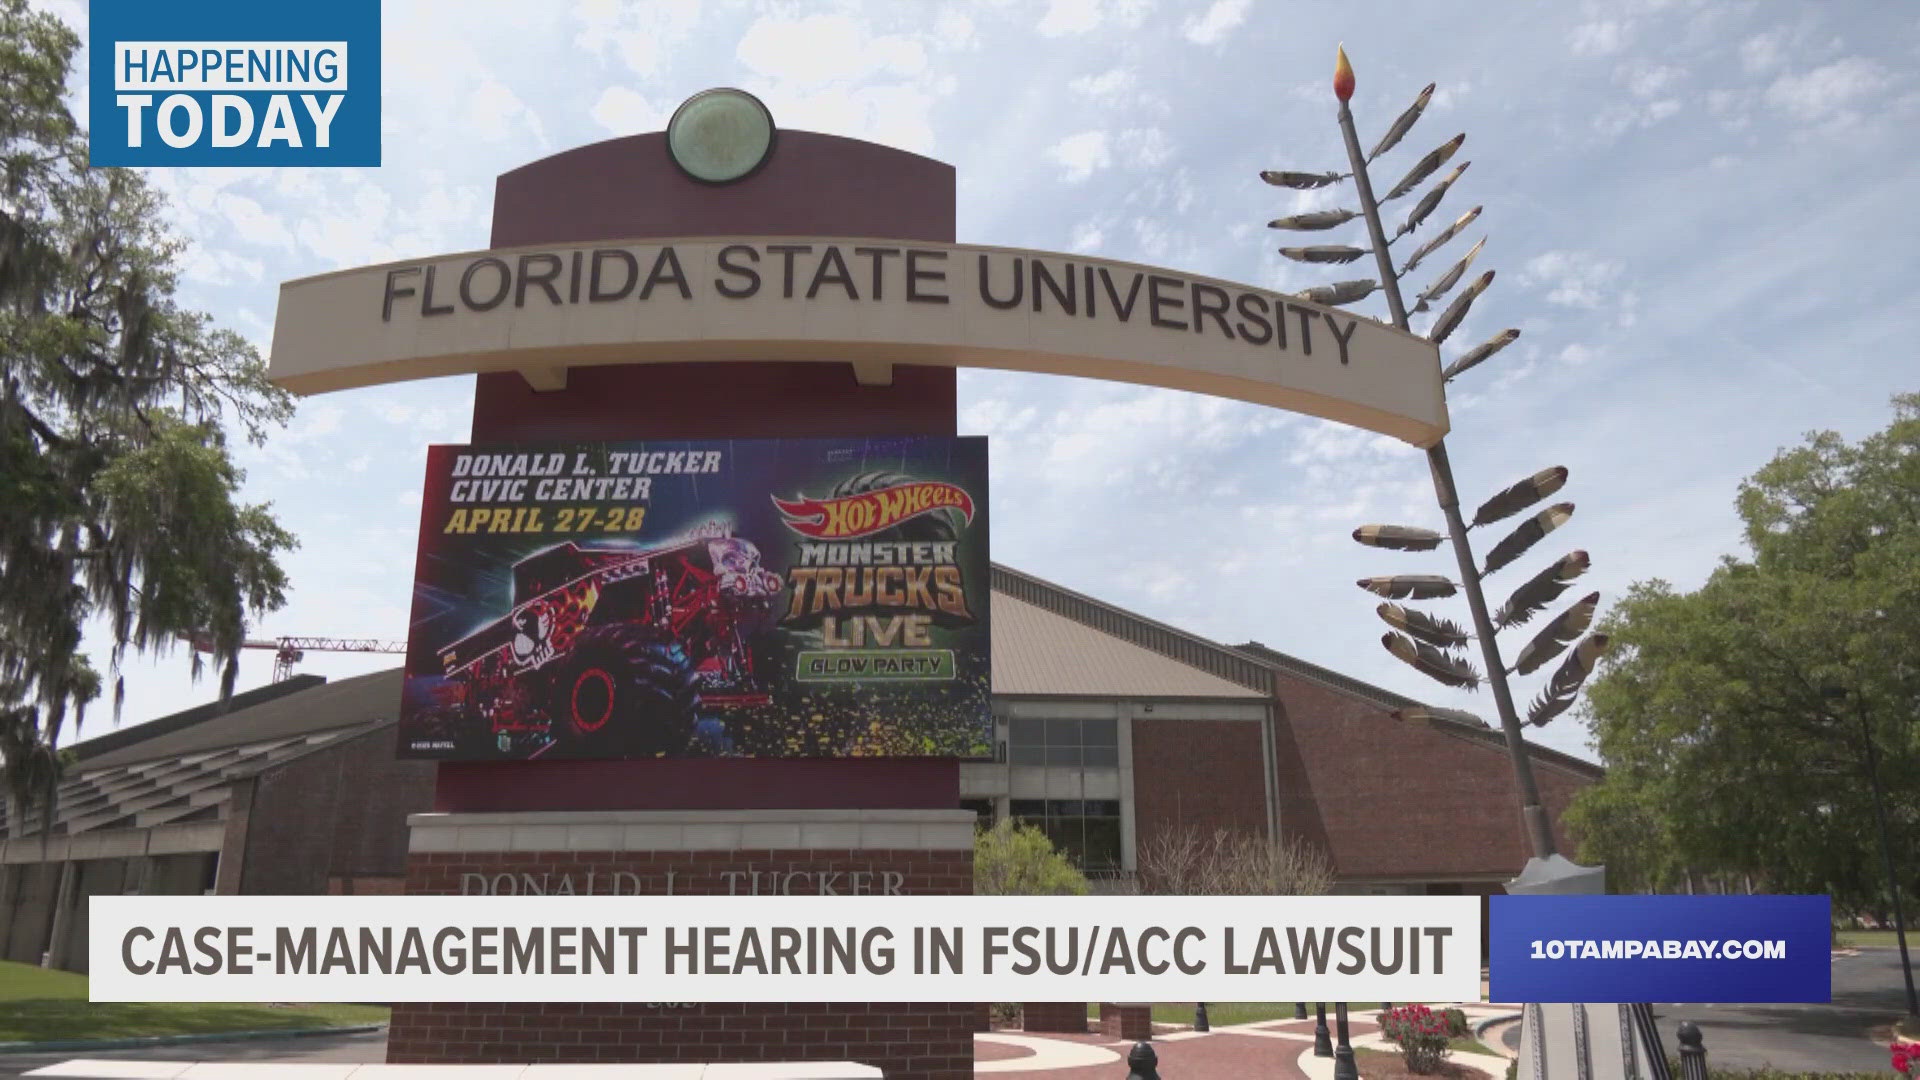 Last month, a judge forced FSU to amend the lawsuit, putting it on hold for now.